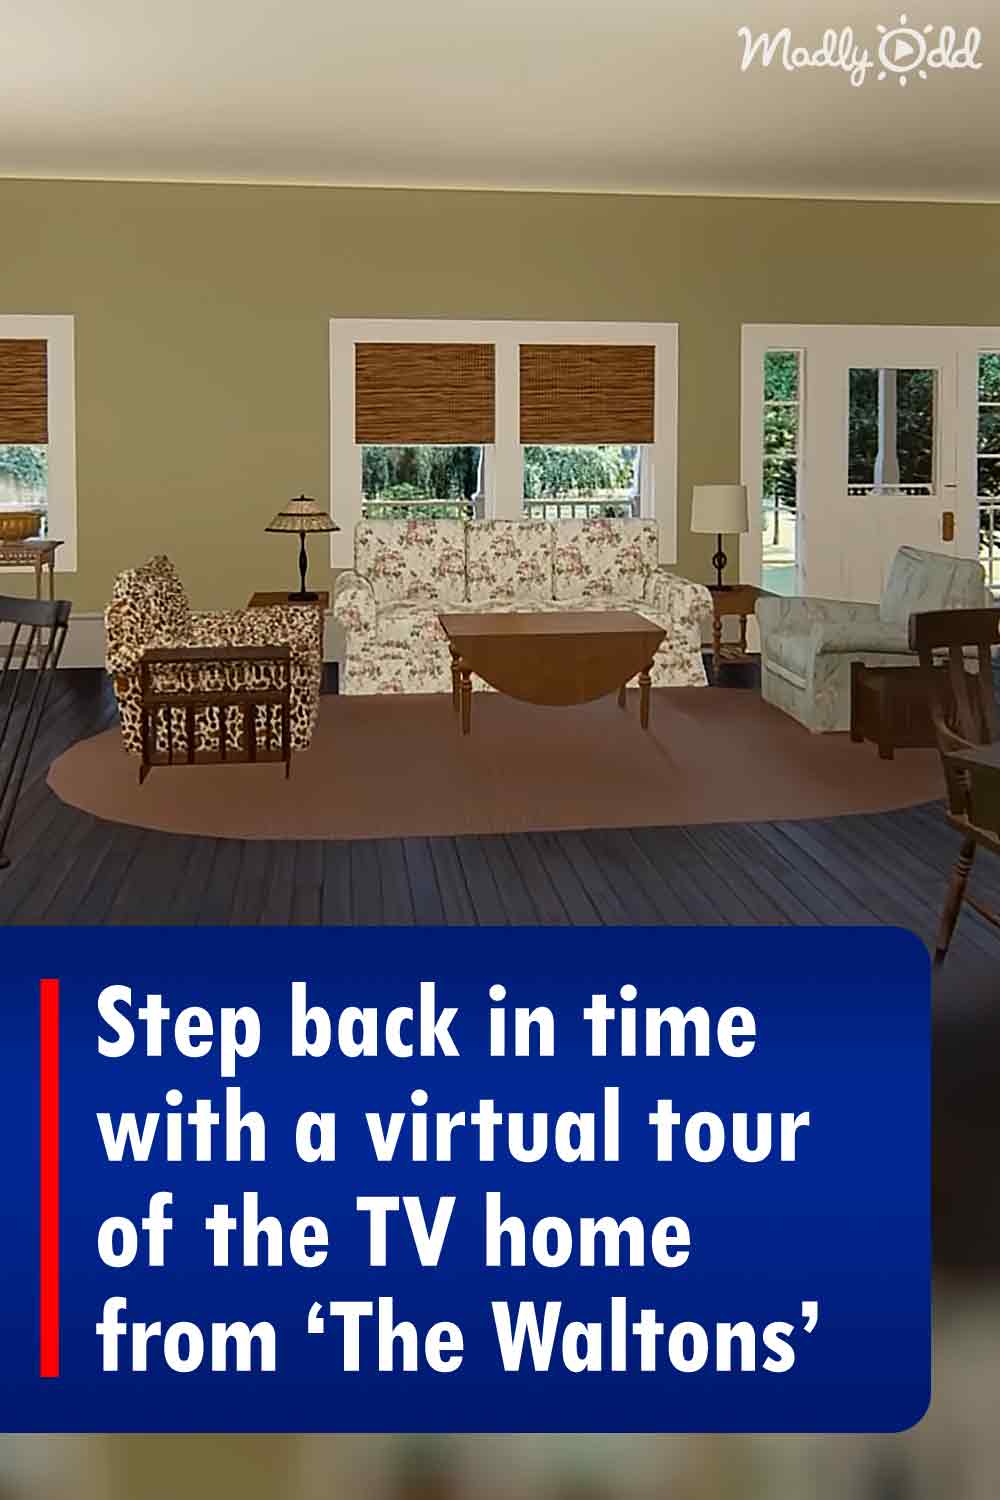 Step back in time with a virtual tour of the TV home from ‘The Waltons’